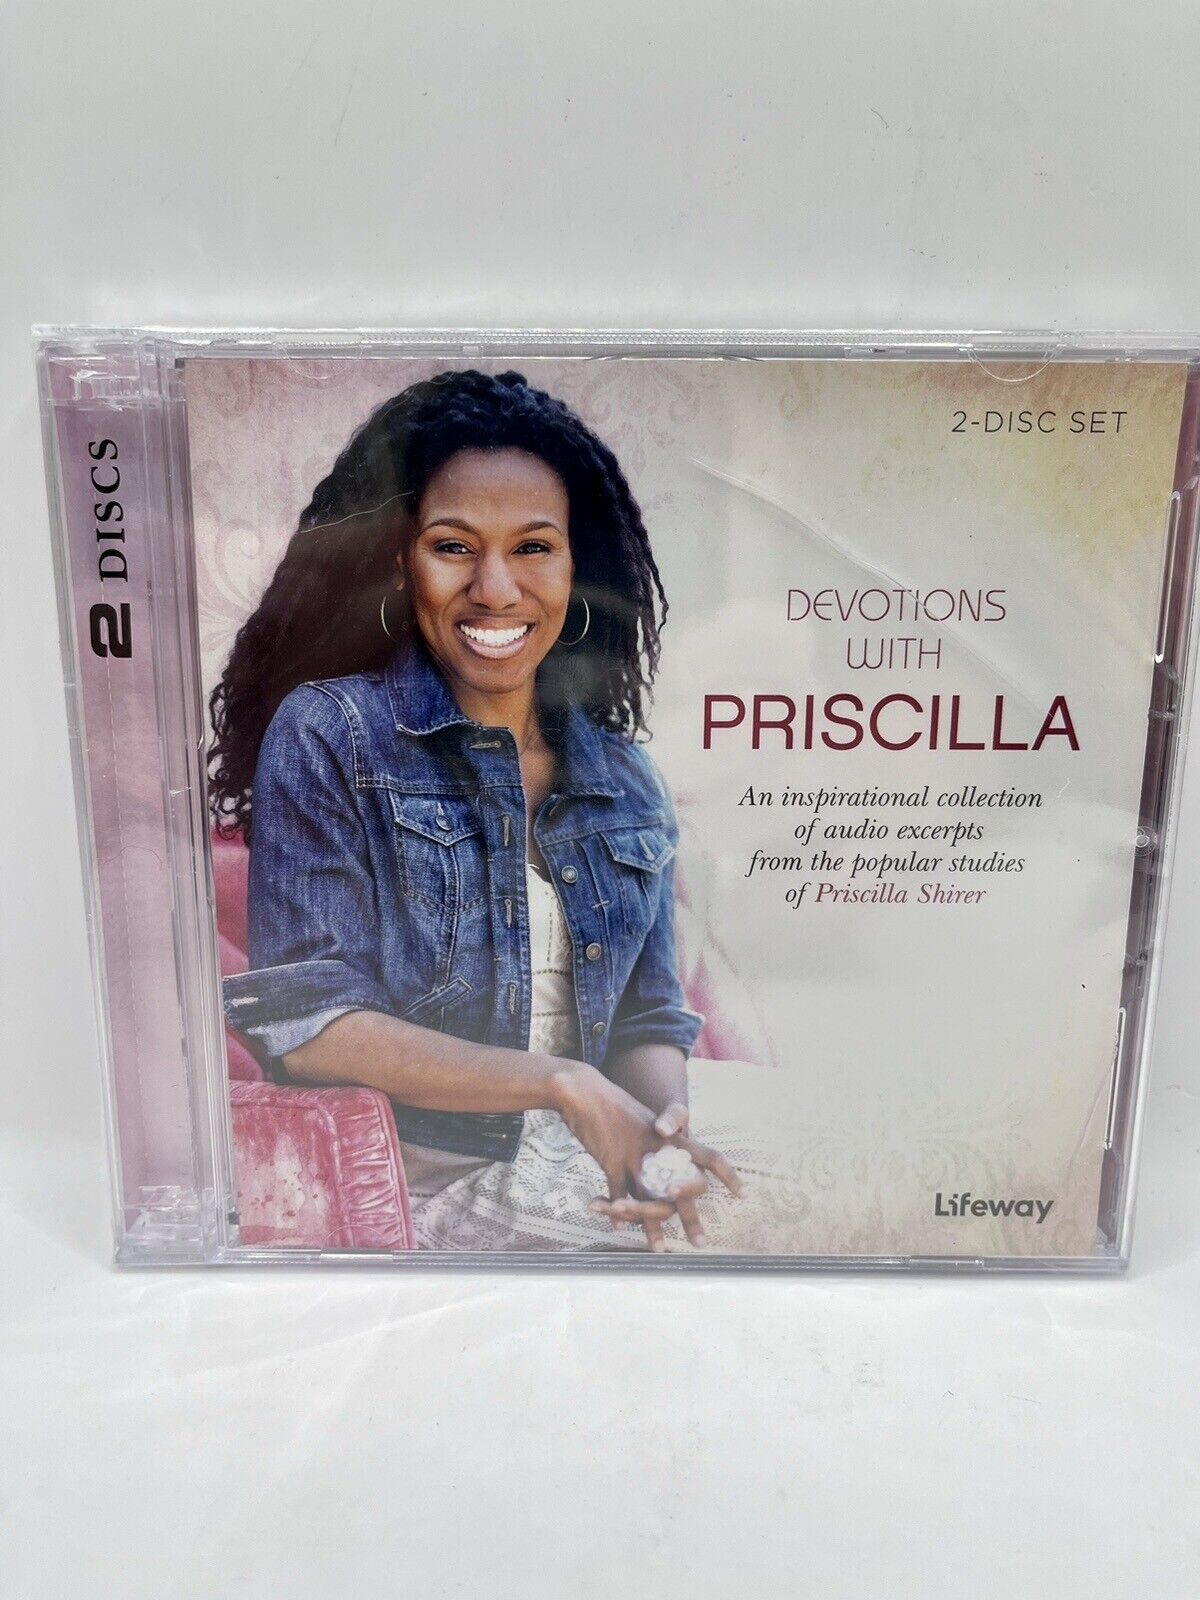 Devotions With Priscilla (CD 2 Disc Set) (Cracked Case) Sealed Package New